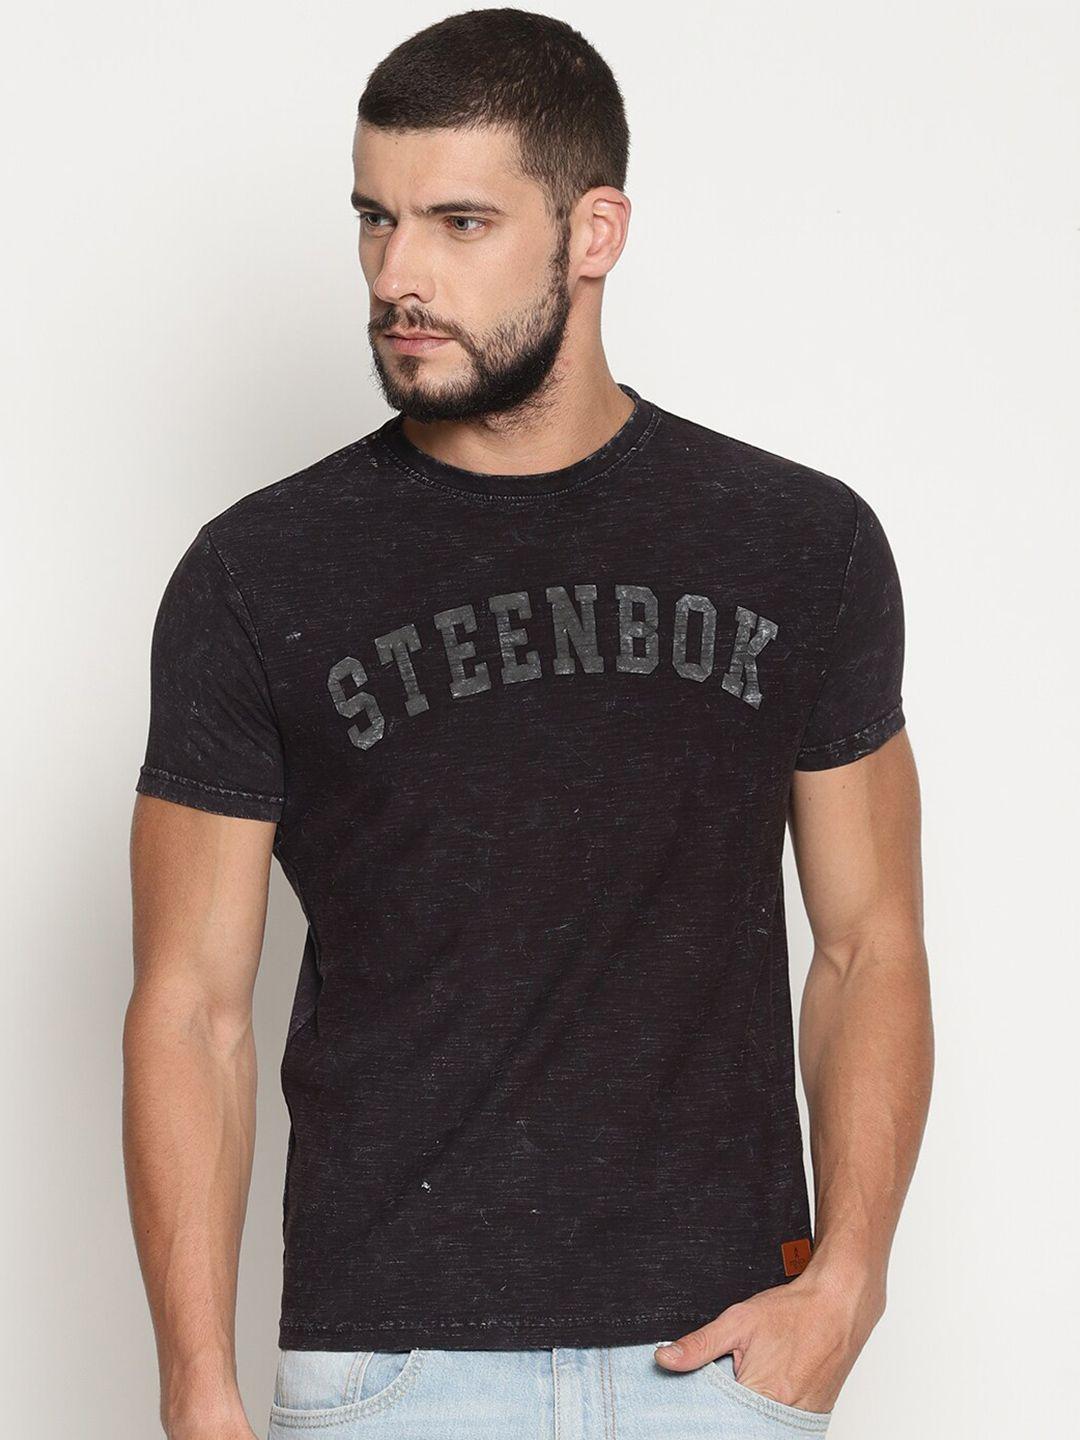 steenbok typography printed cotton slim fit t-shirt